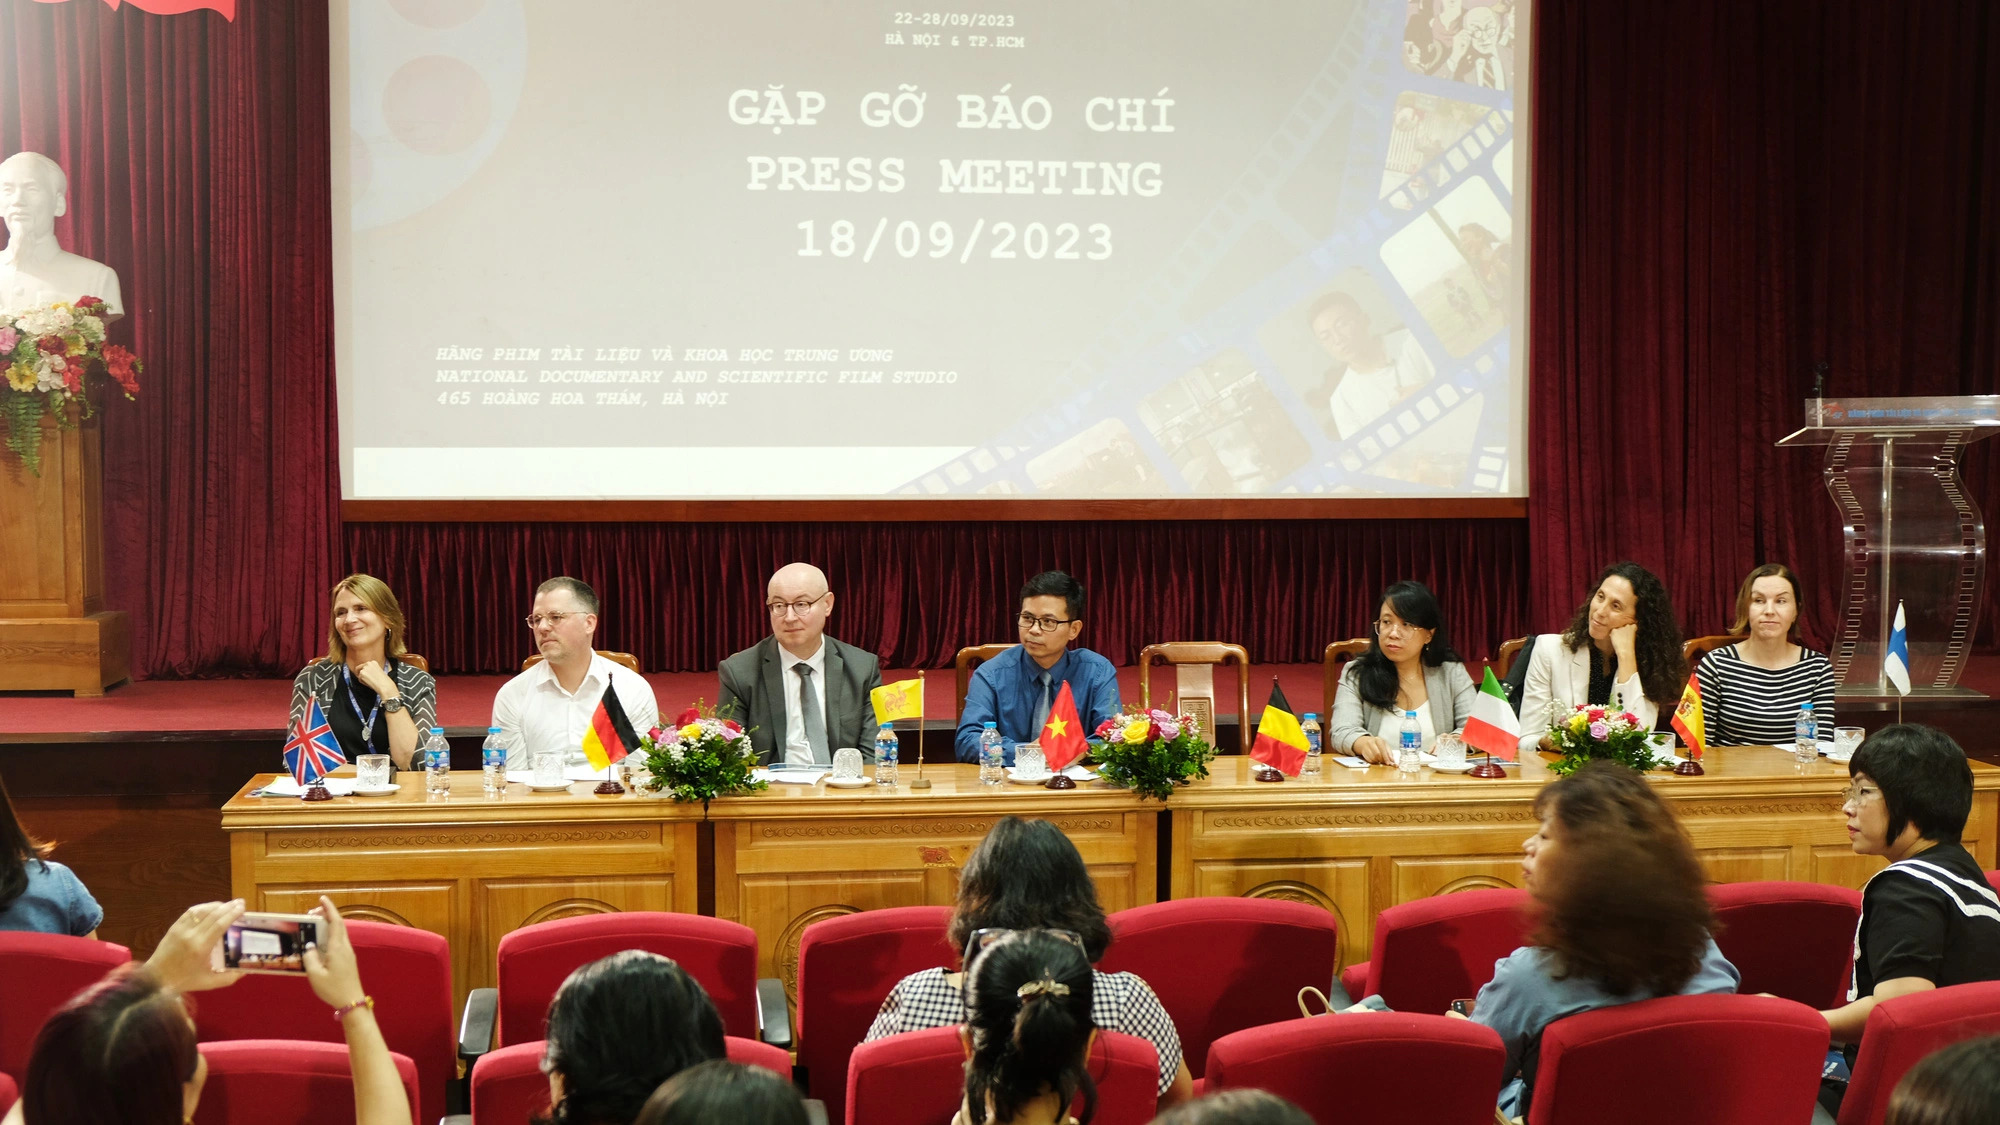 Participants at a press meeting to announce the 13th European-Vietnamese Documentary Film Festival in Hanoi, September 18, 2023. Photo: Dau Dung / Tuoi Tre